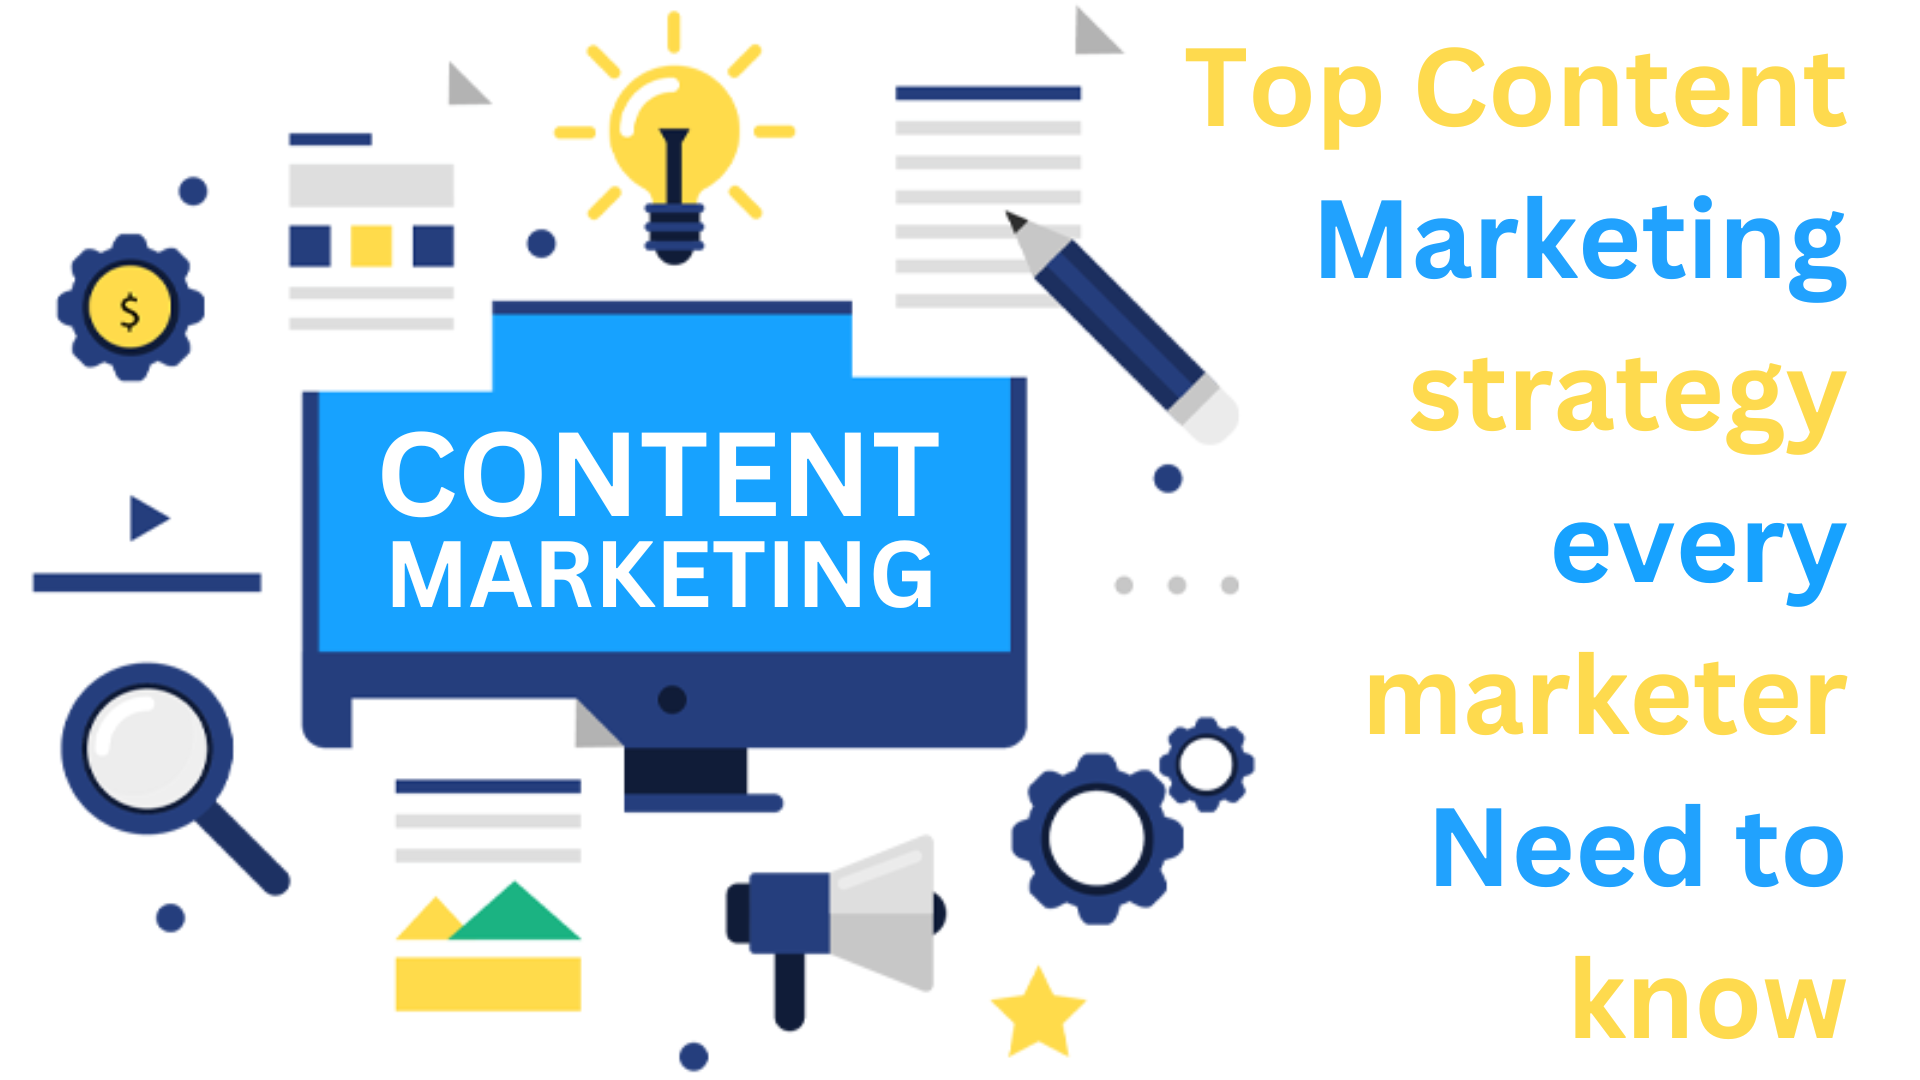 <b>Top Content Marketing strategy every marketer Need to know</b>